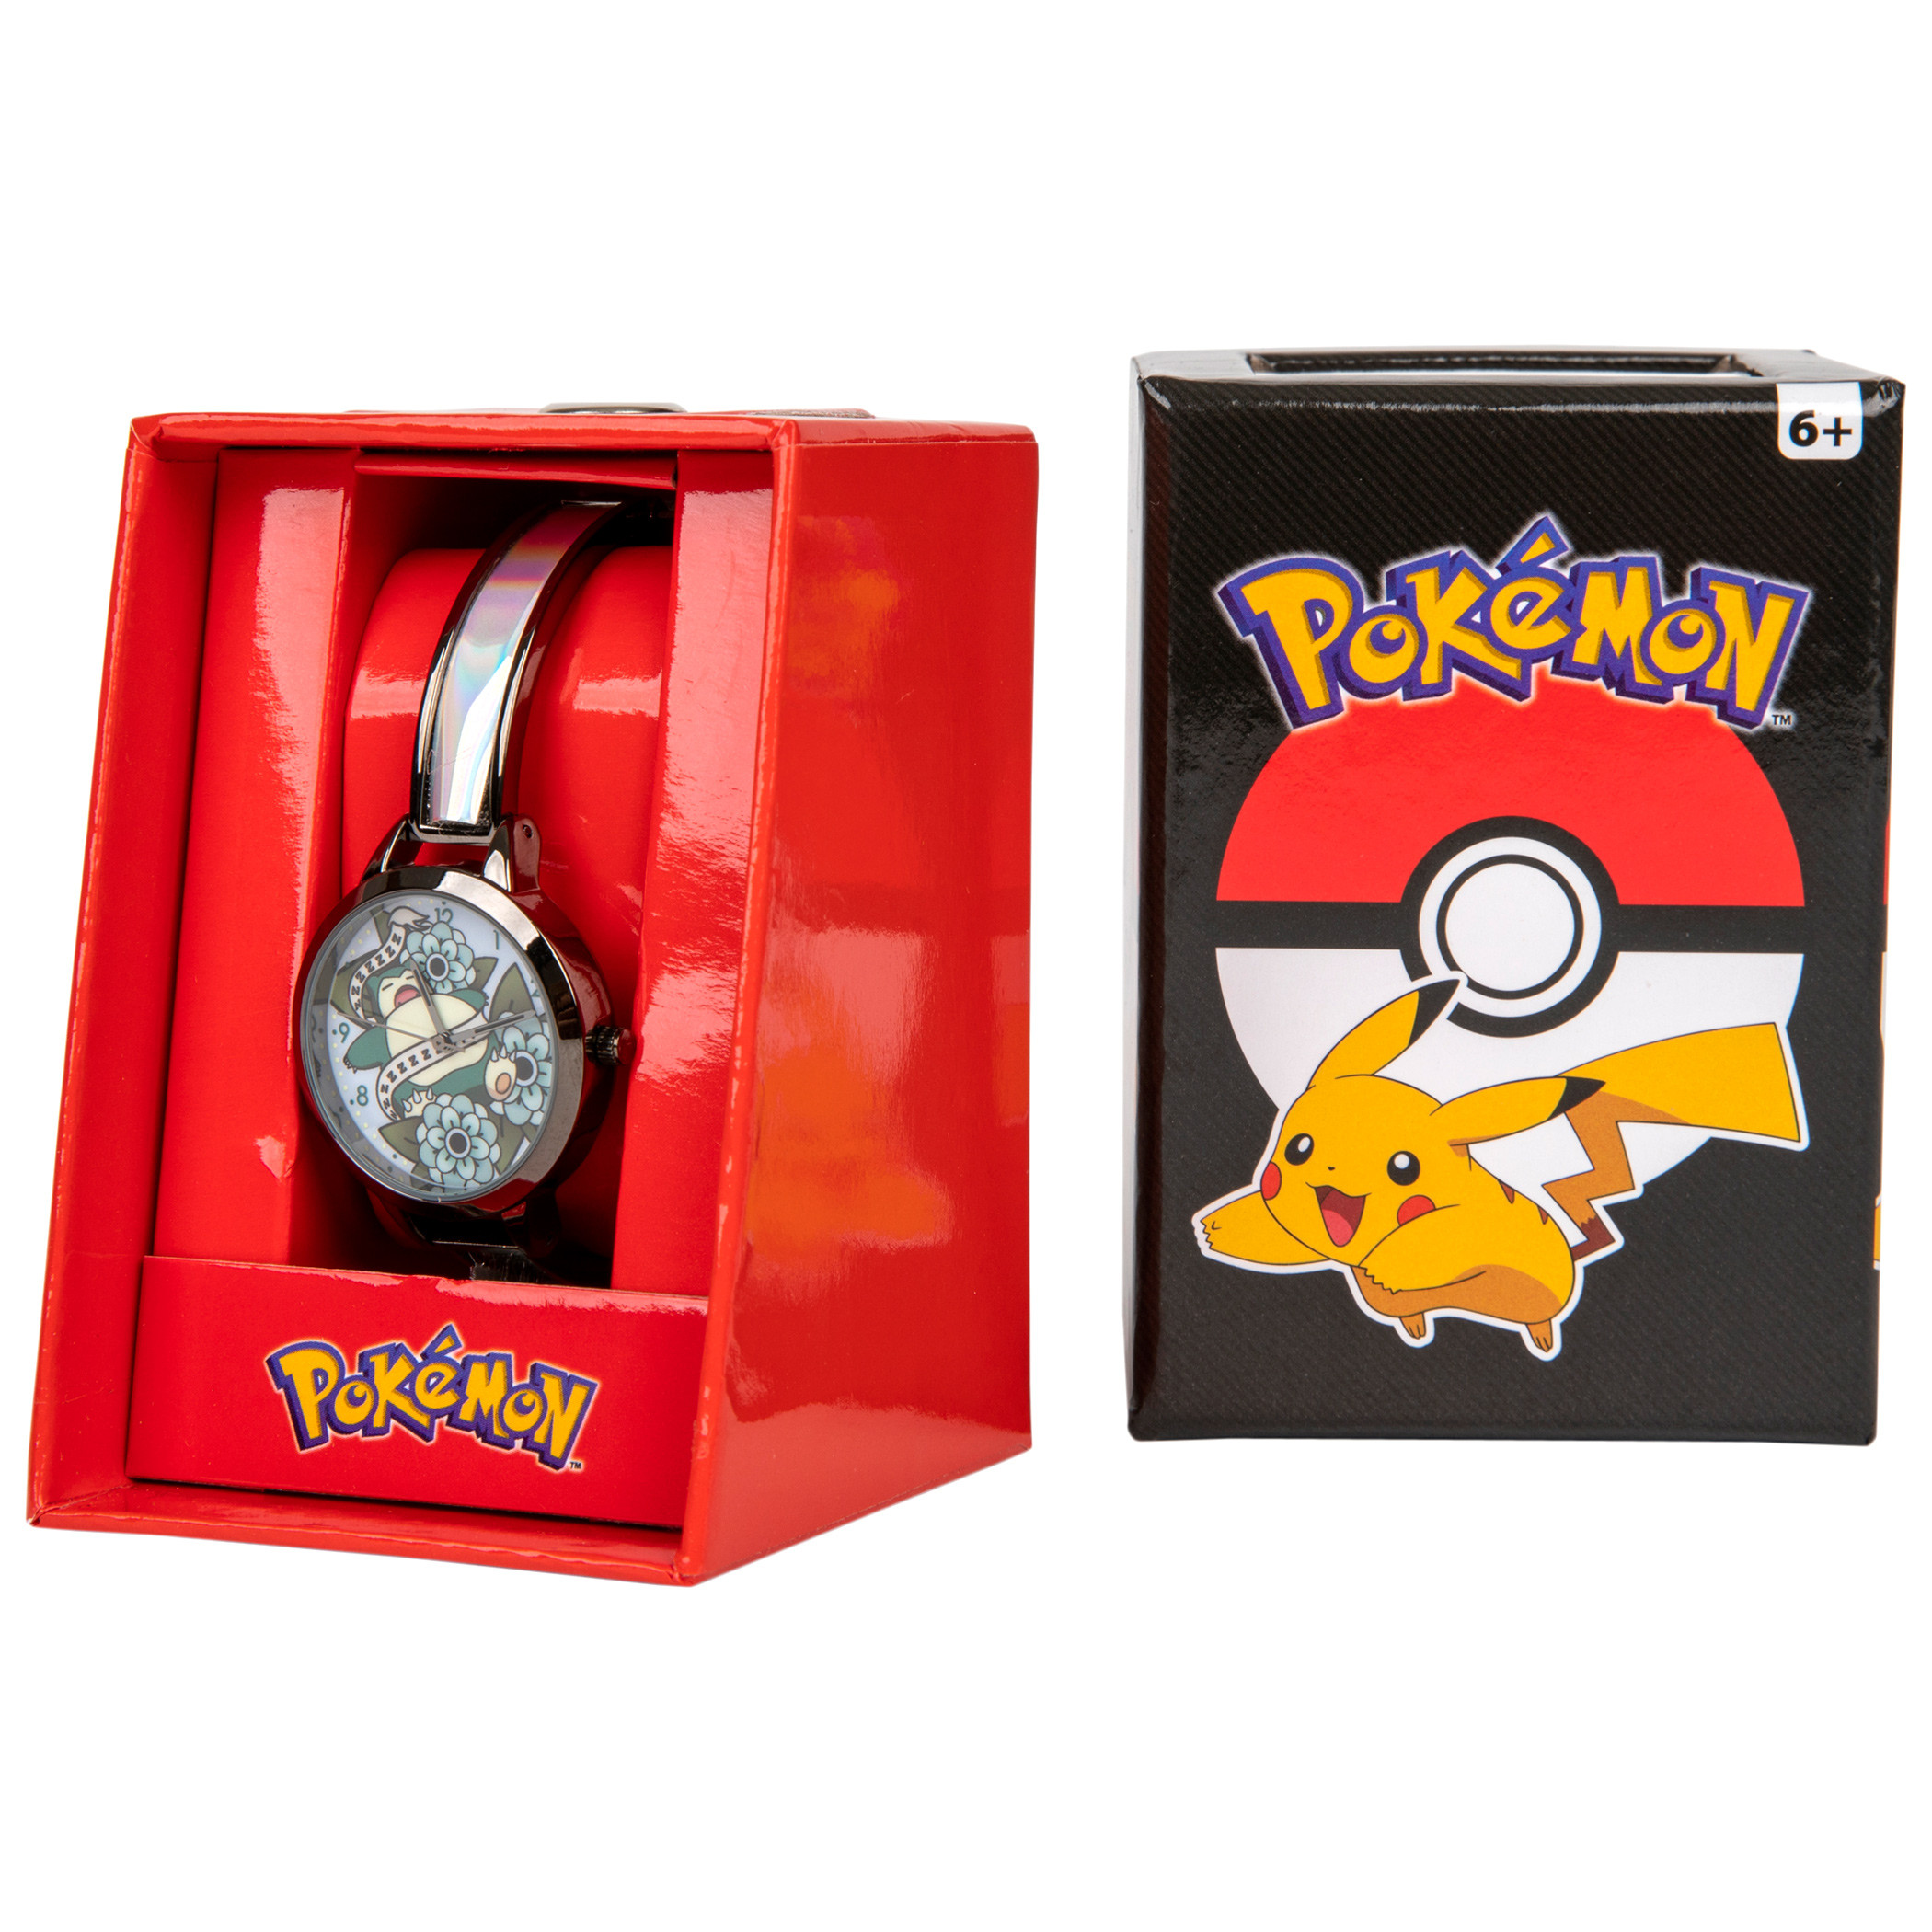 Pokemon Snorlax in Flowers with Holographic Wristband Watch